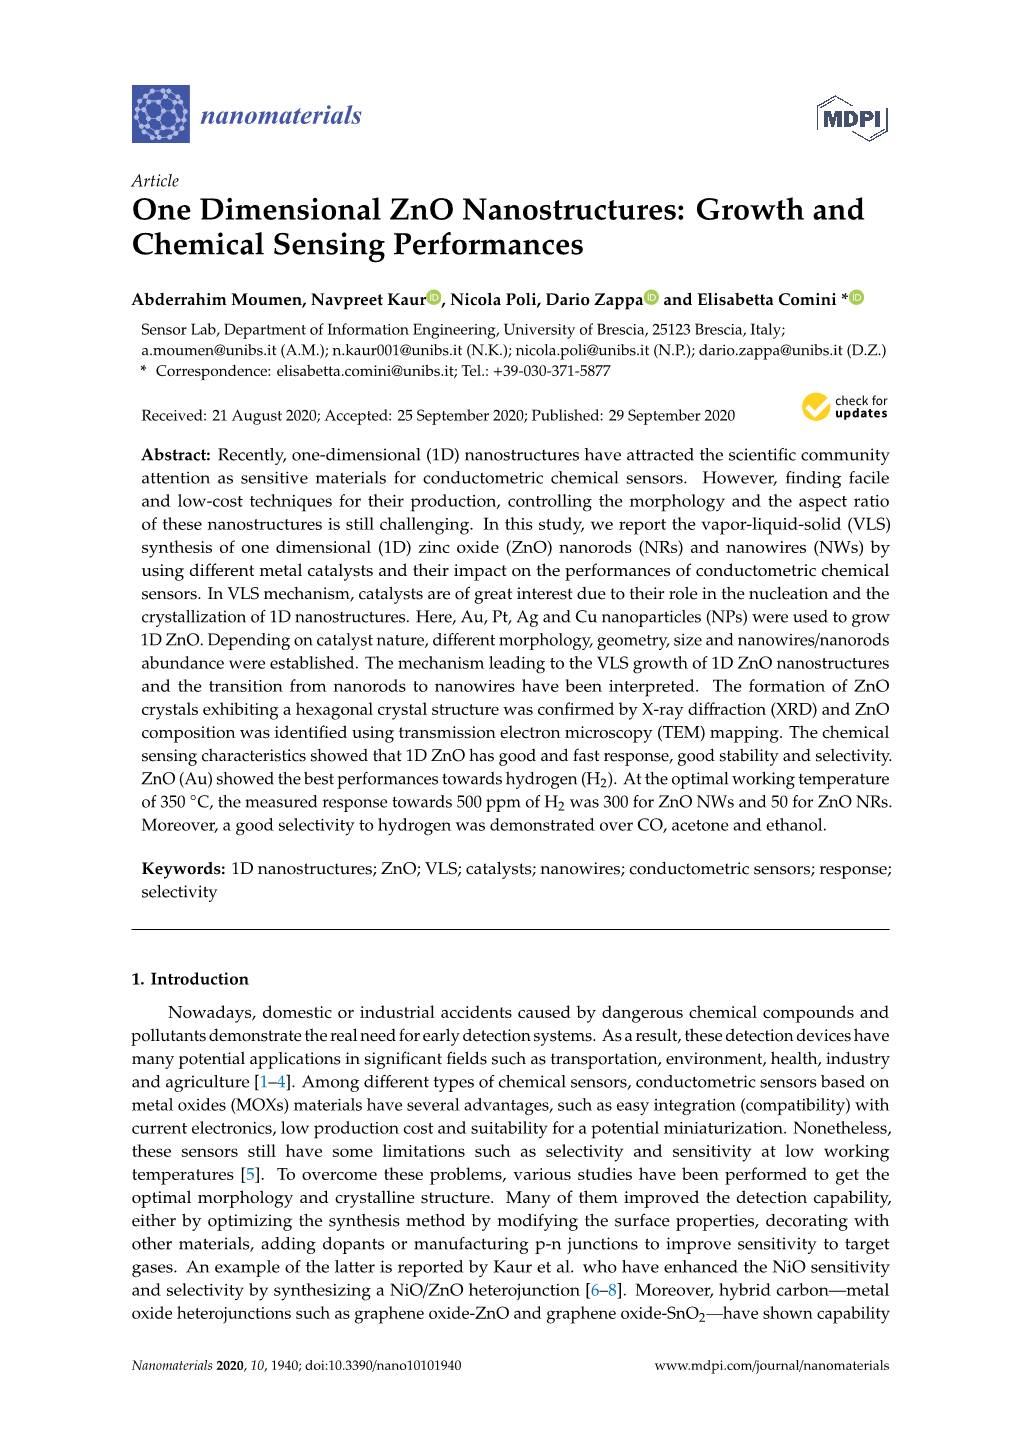 One Dimensional Zno Nanostructures: Growth and Chemical Sensing Performances